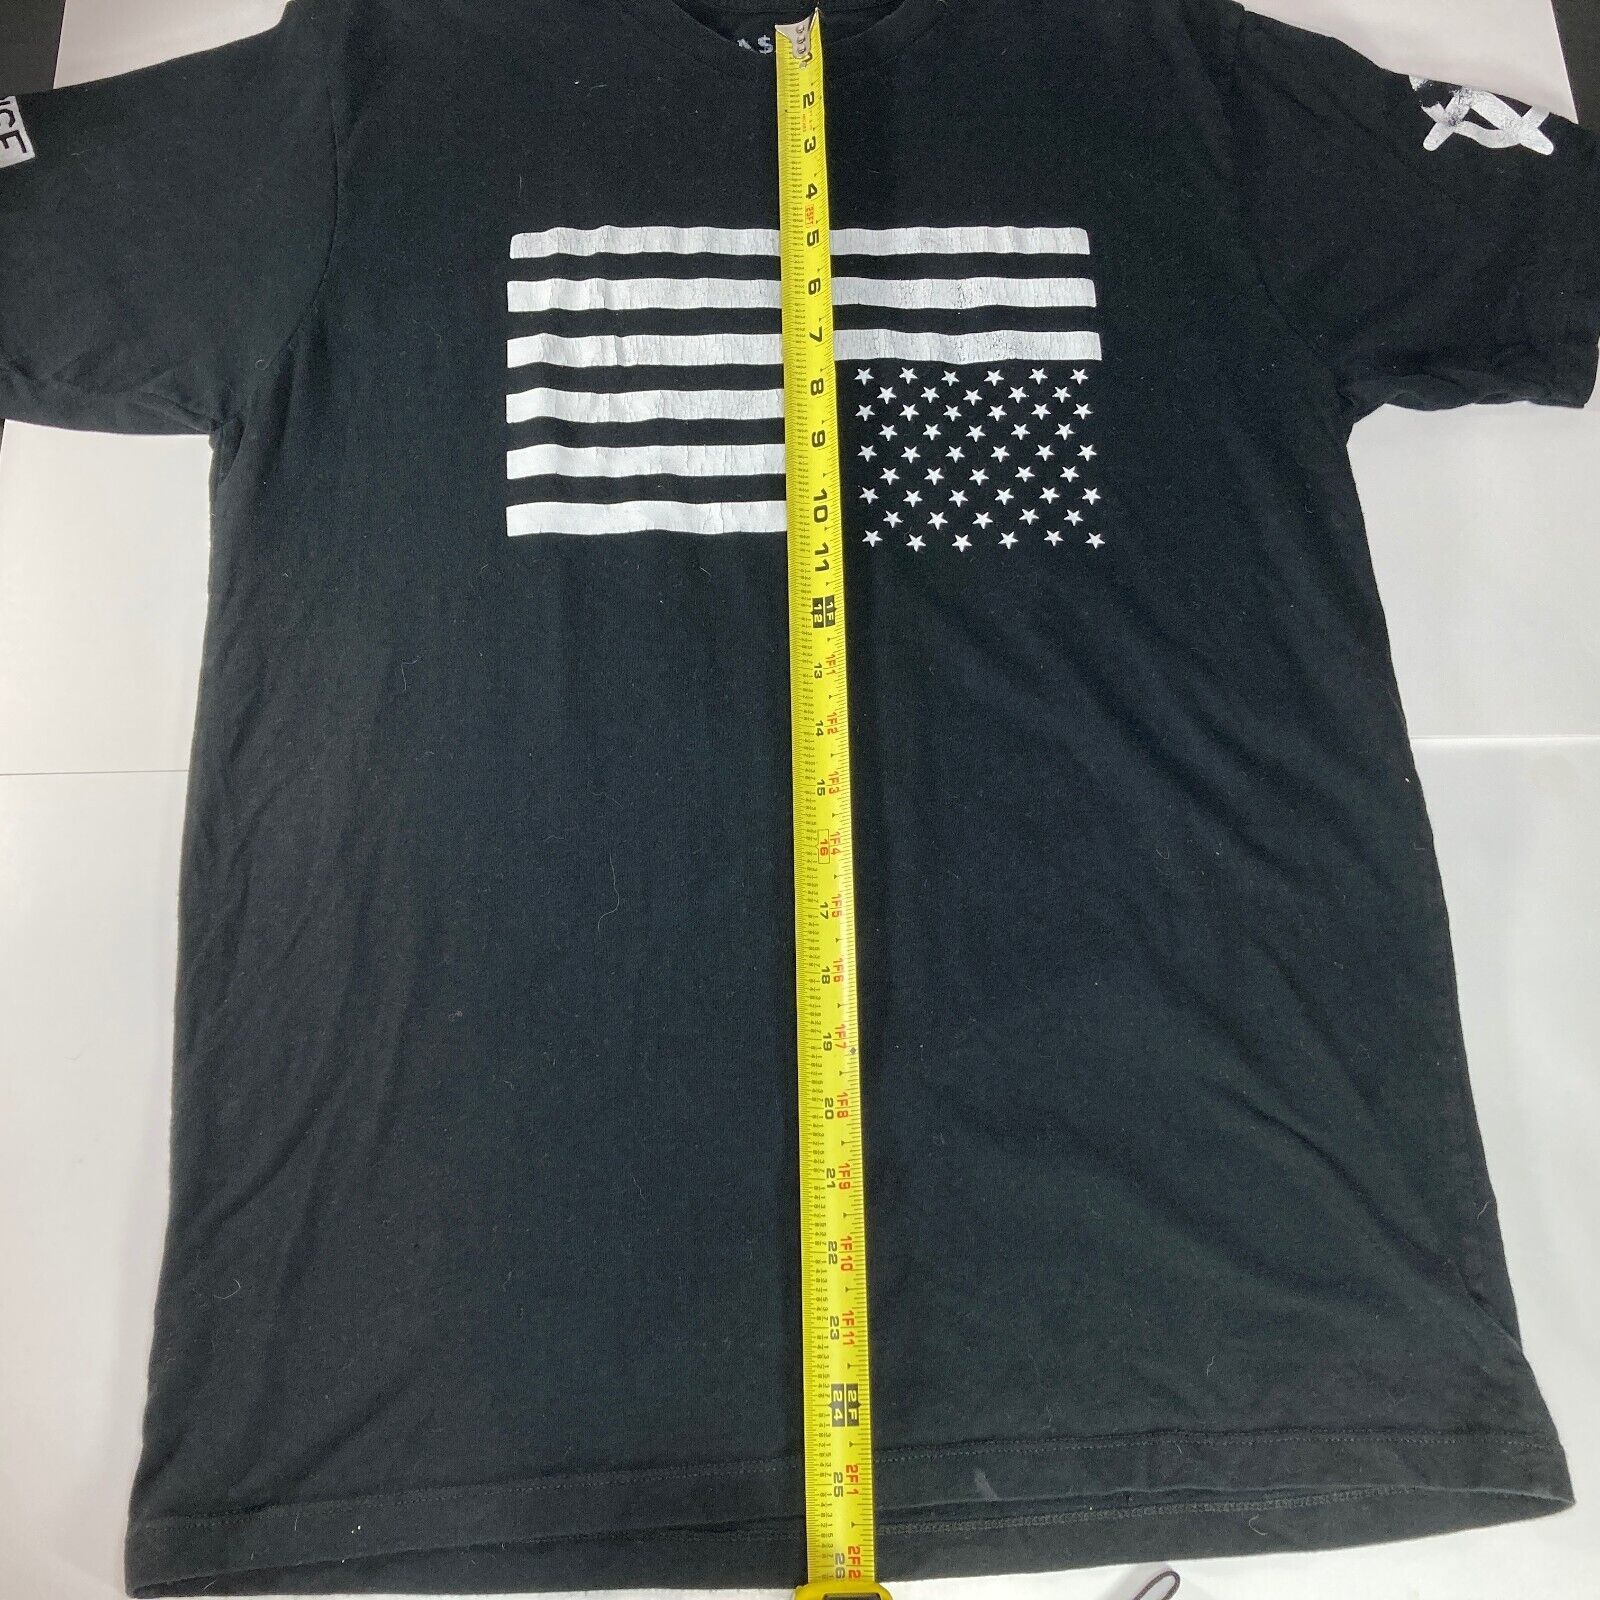 Primary image for Women's Size Large A$AP PVRVDISE 06 ASAP ROCKY WORLDWIDE Black tshirt